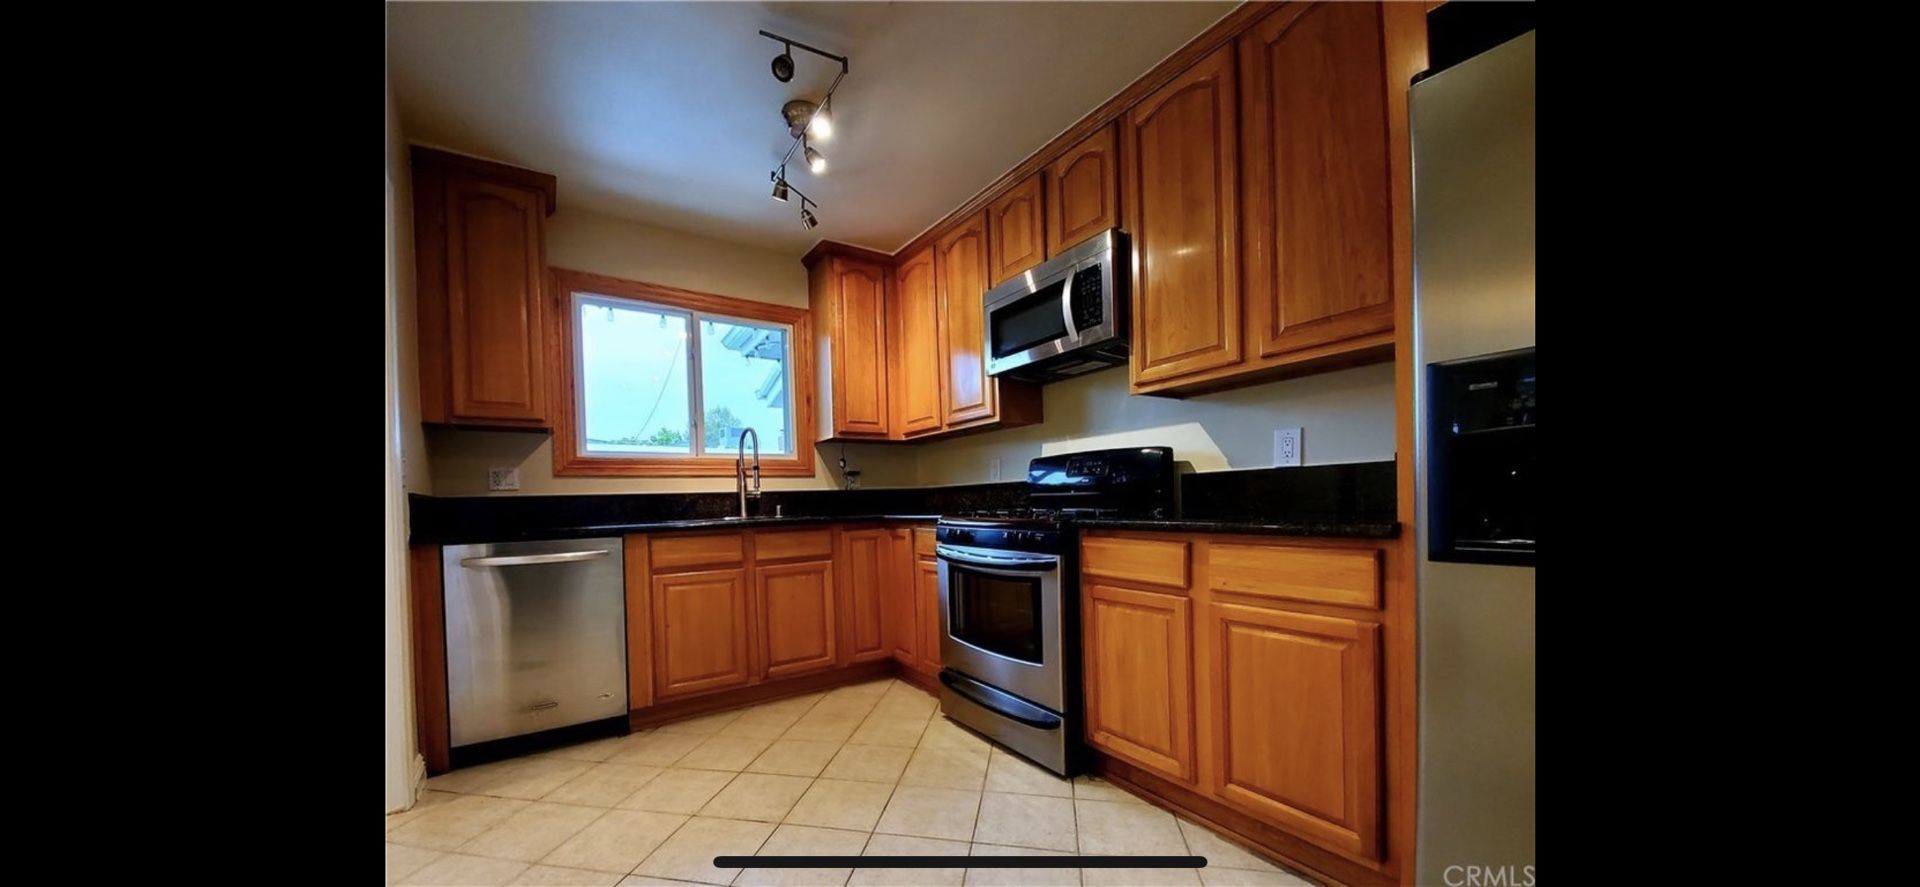 kitchen cabinets Counter tops Stove and Microwave